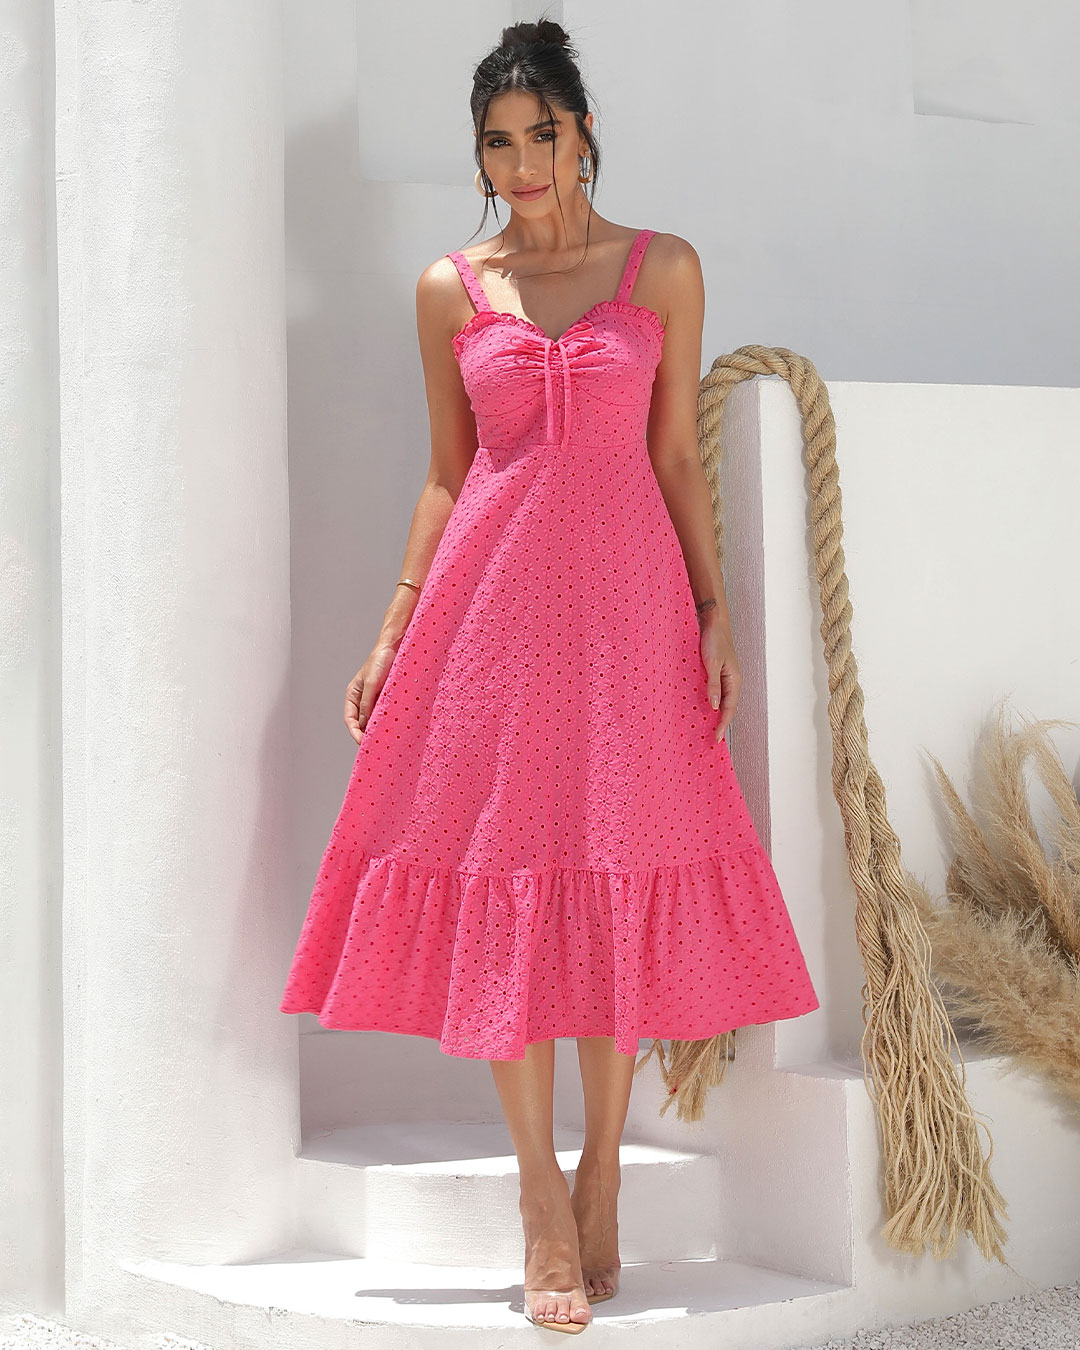 Miss Misses - Dress Miss Misses Laise With Tie Bust Pink - 54188ROSA